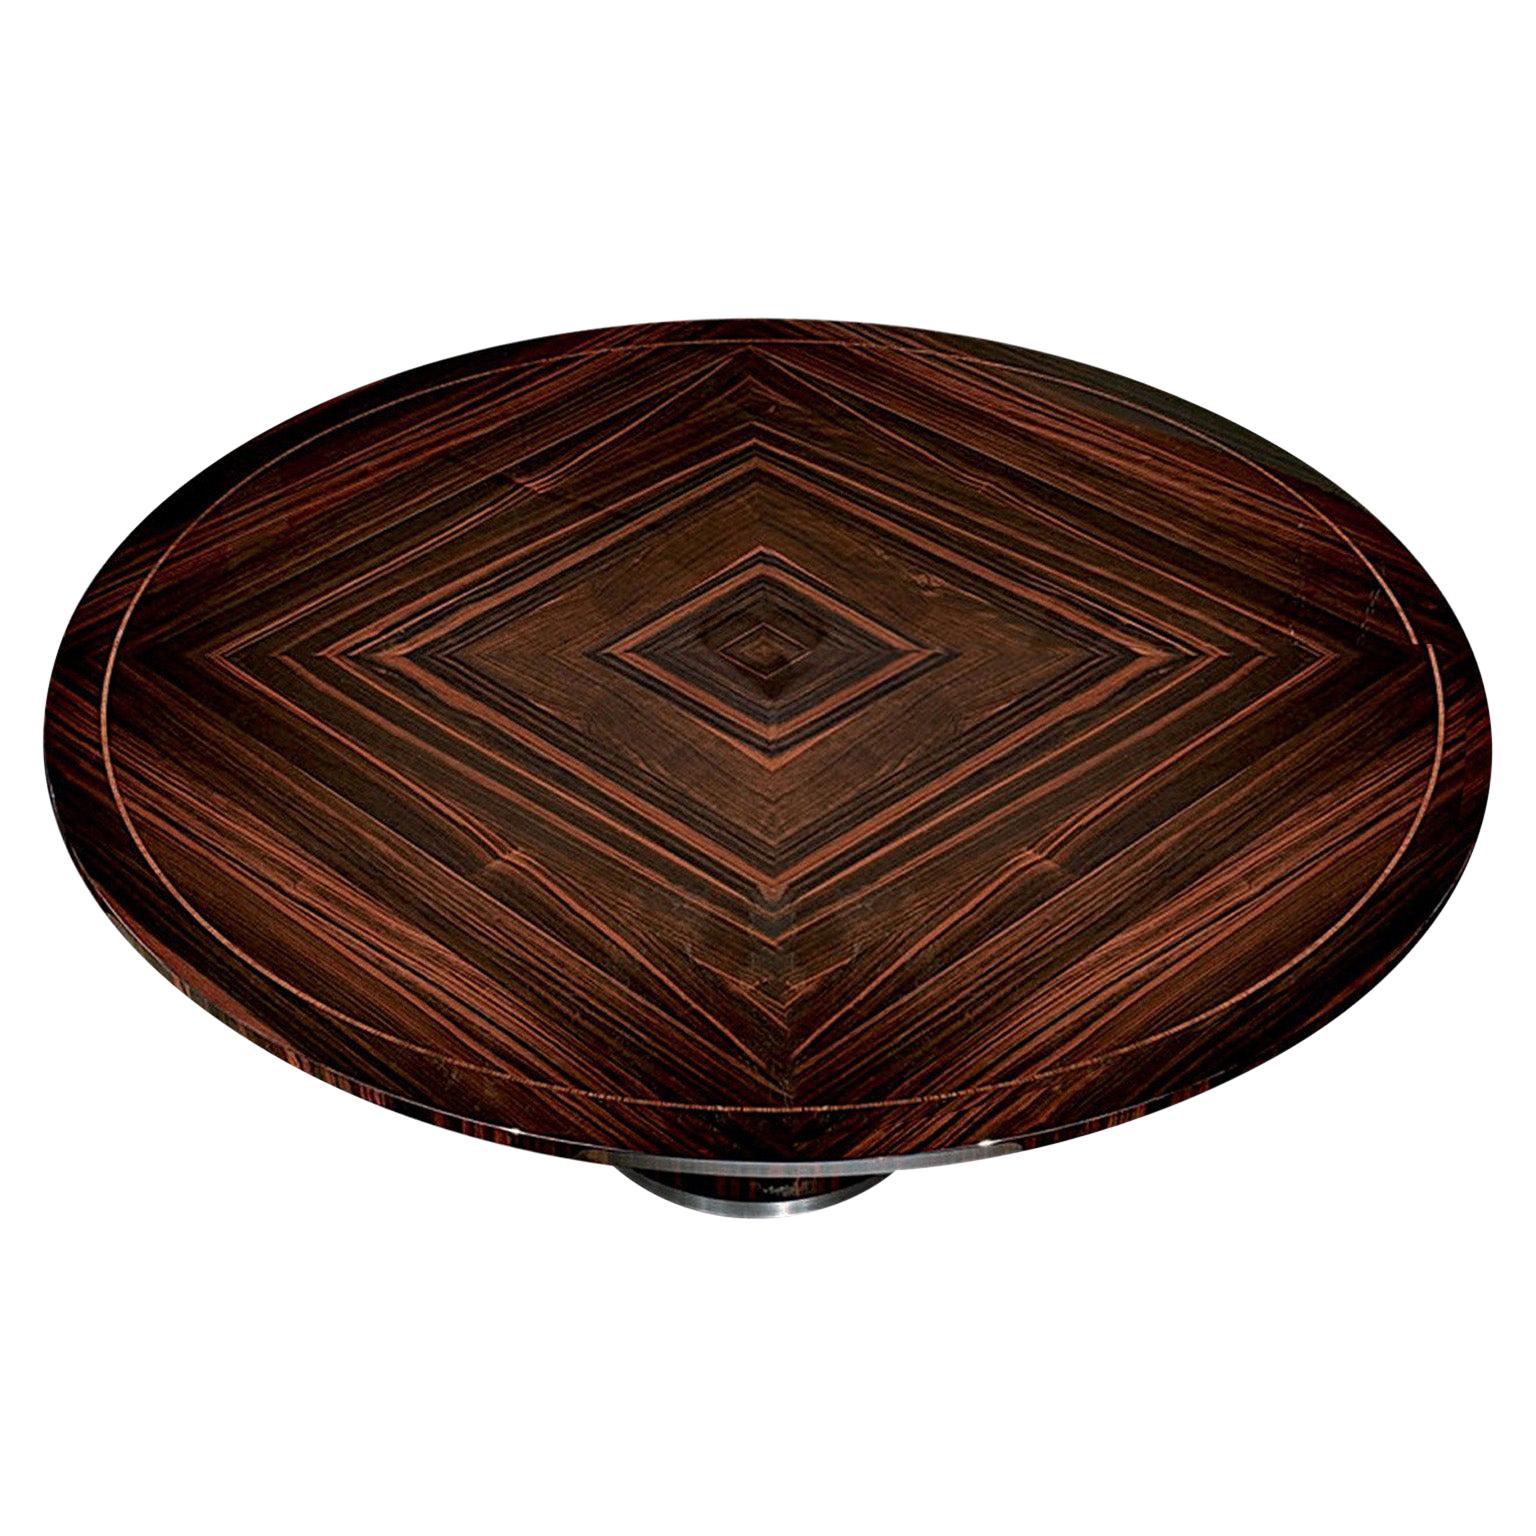 Round dining table with inlay top in ebony Makassar with 6mm filet in Zebra veneer in
high gloss polyester. Brushed and chrome stainless steel details on the table’s legs.


Size: diameter cm 122 x 75 height
Size: diameter 48” x 29”½ height.

This